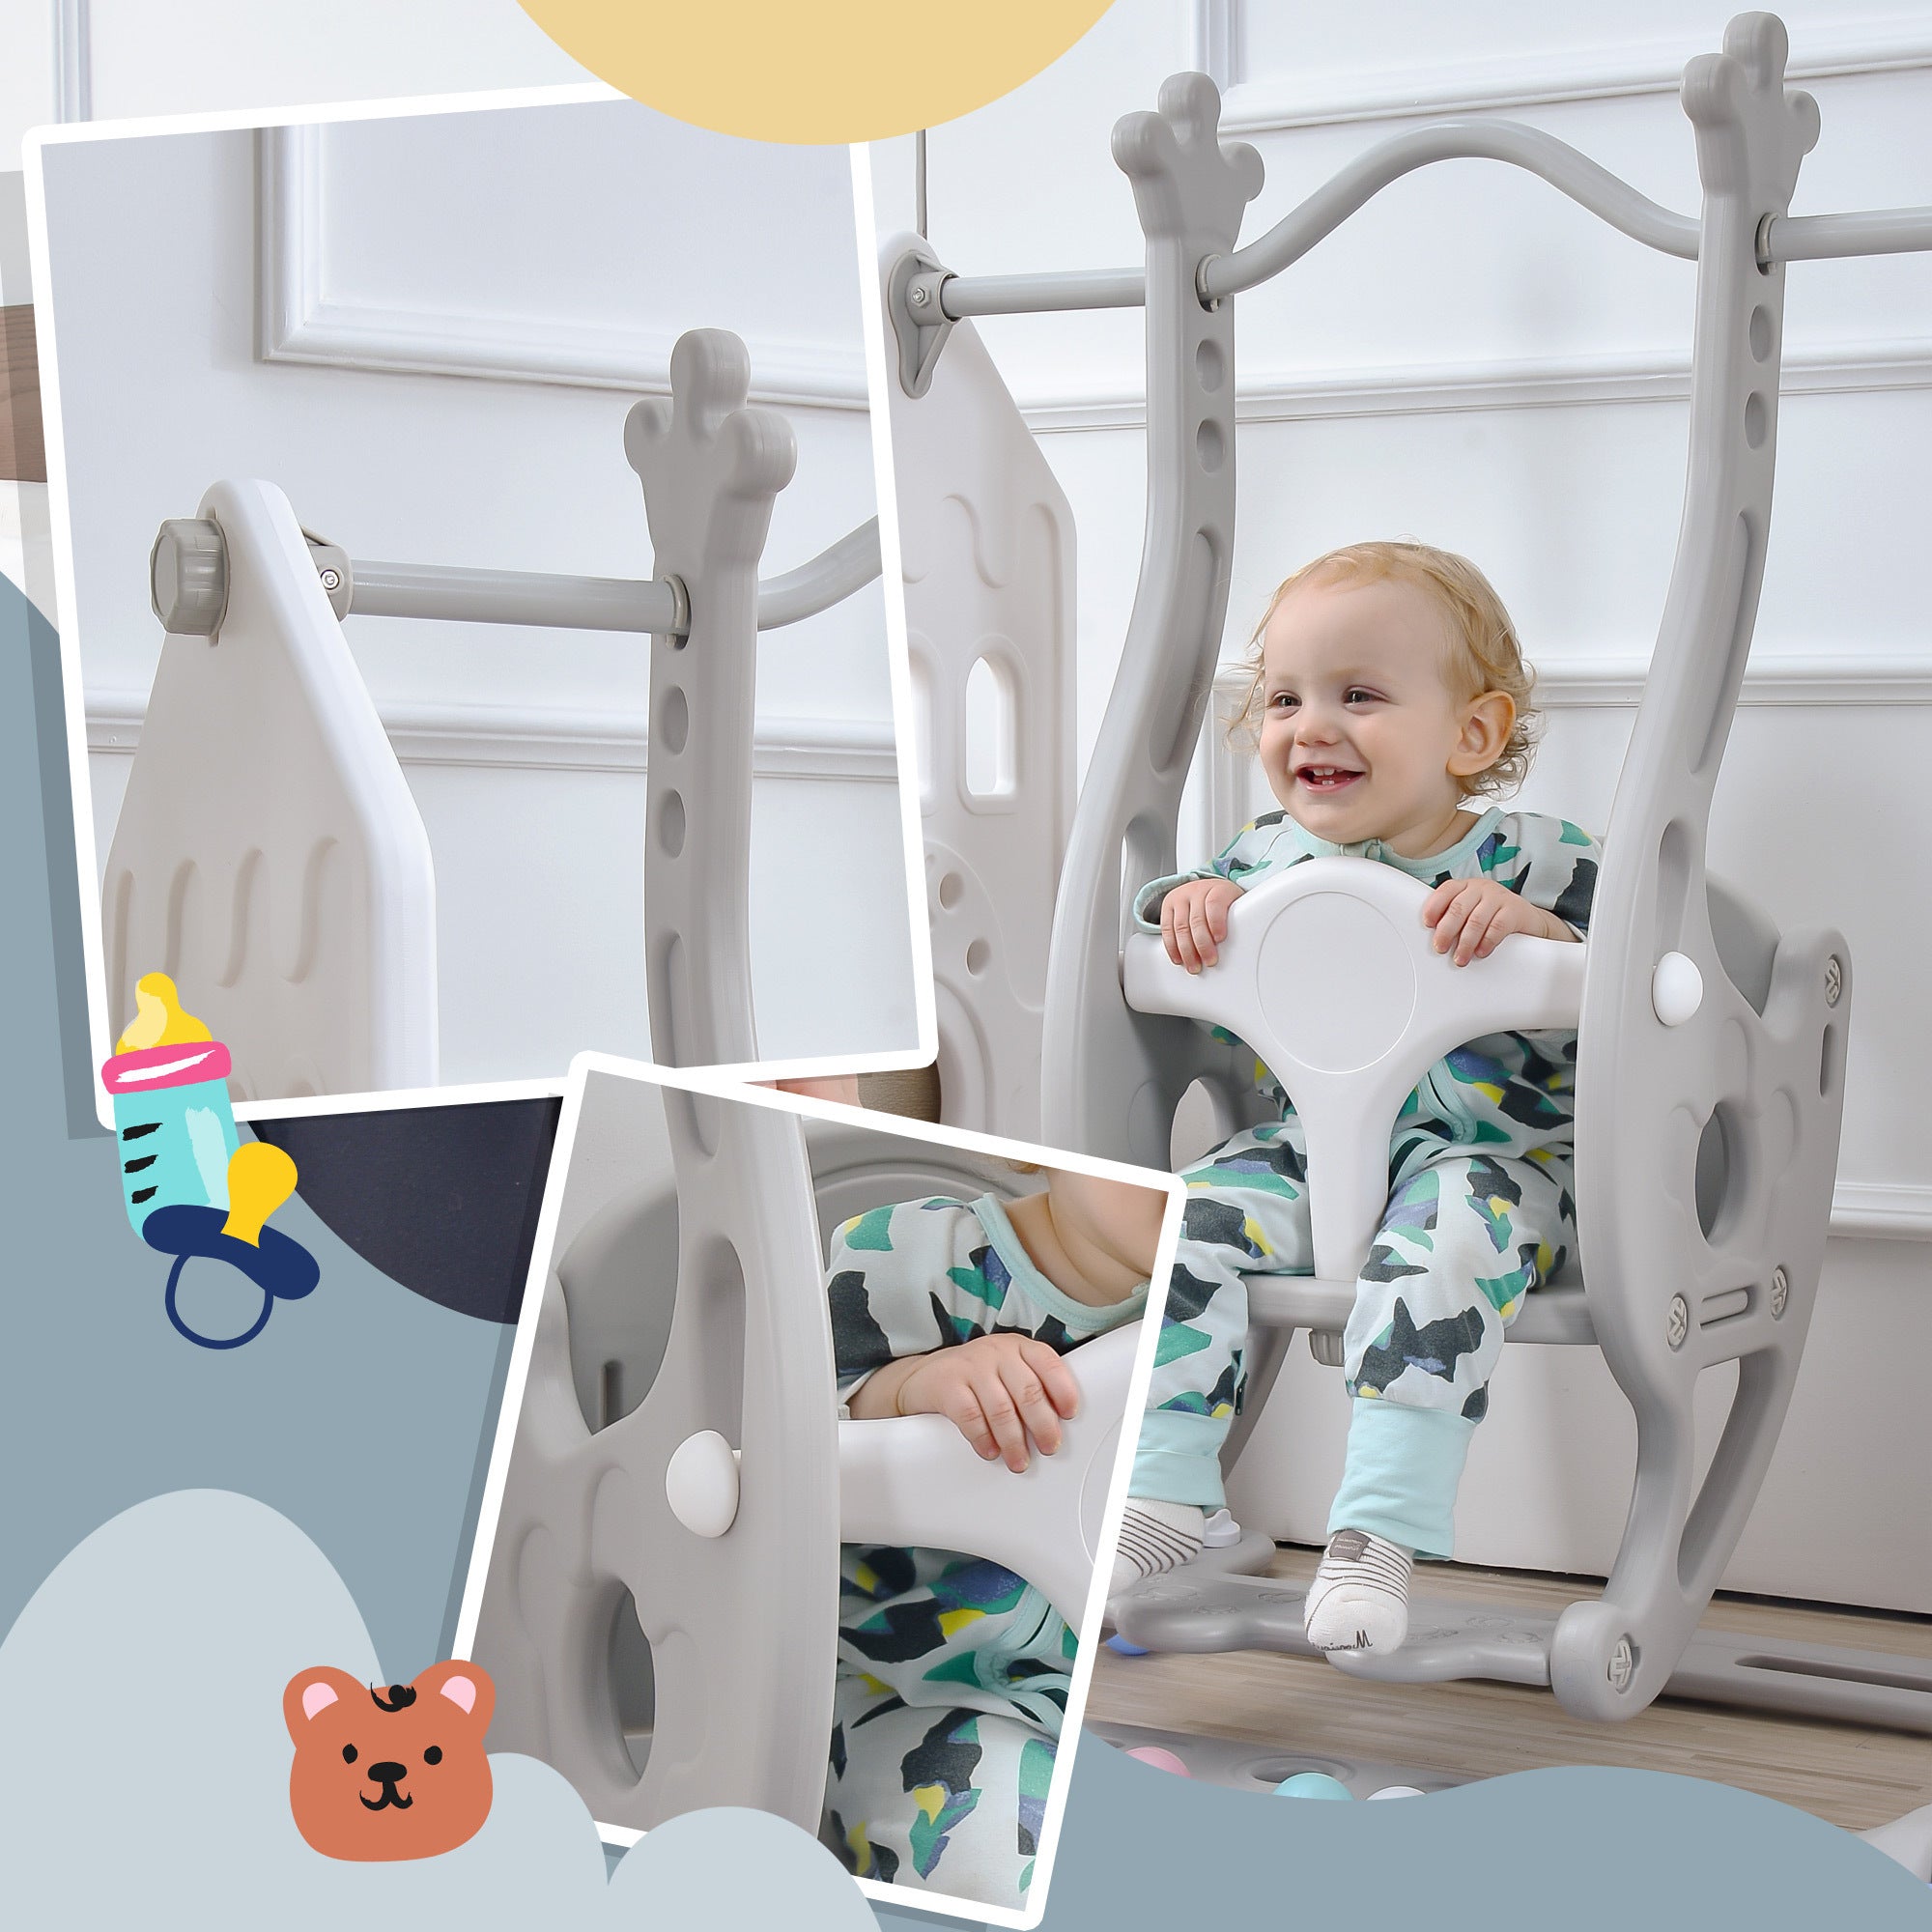 Baby Playpen for Toddler, Astronaut Theme Set 2